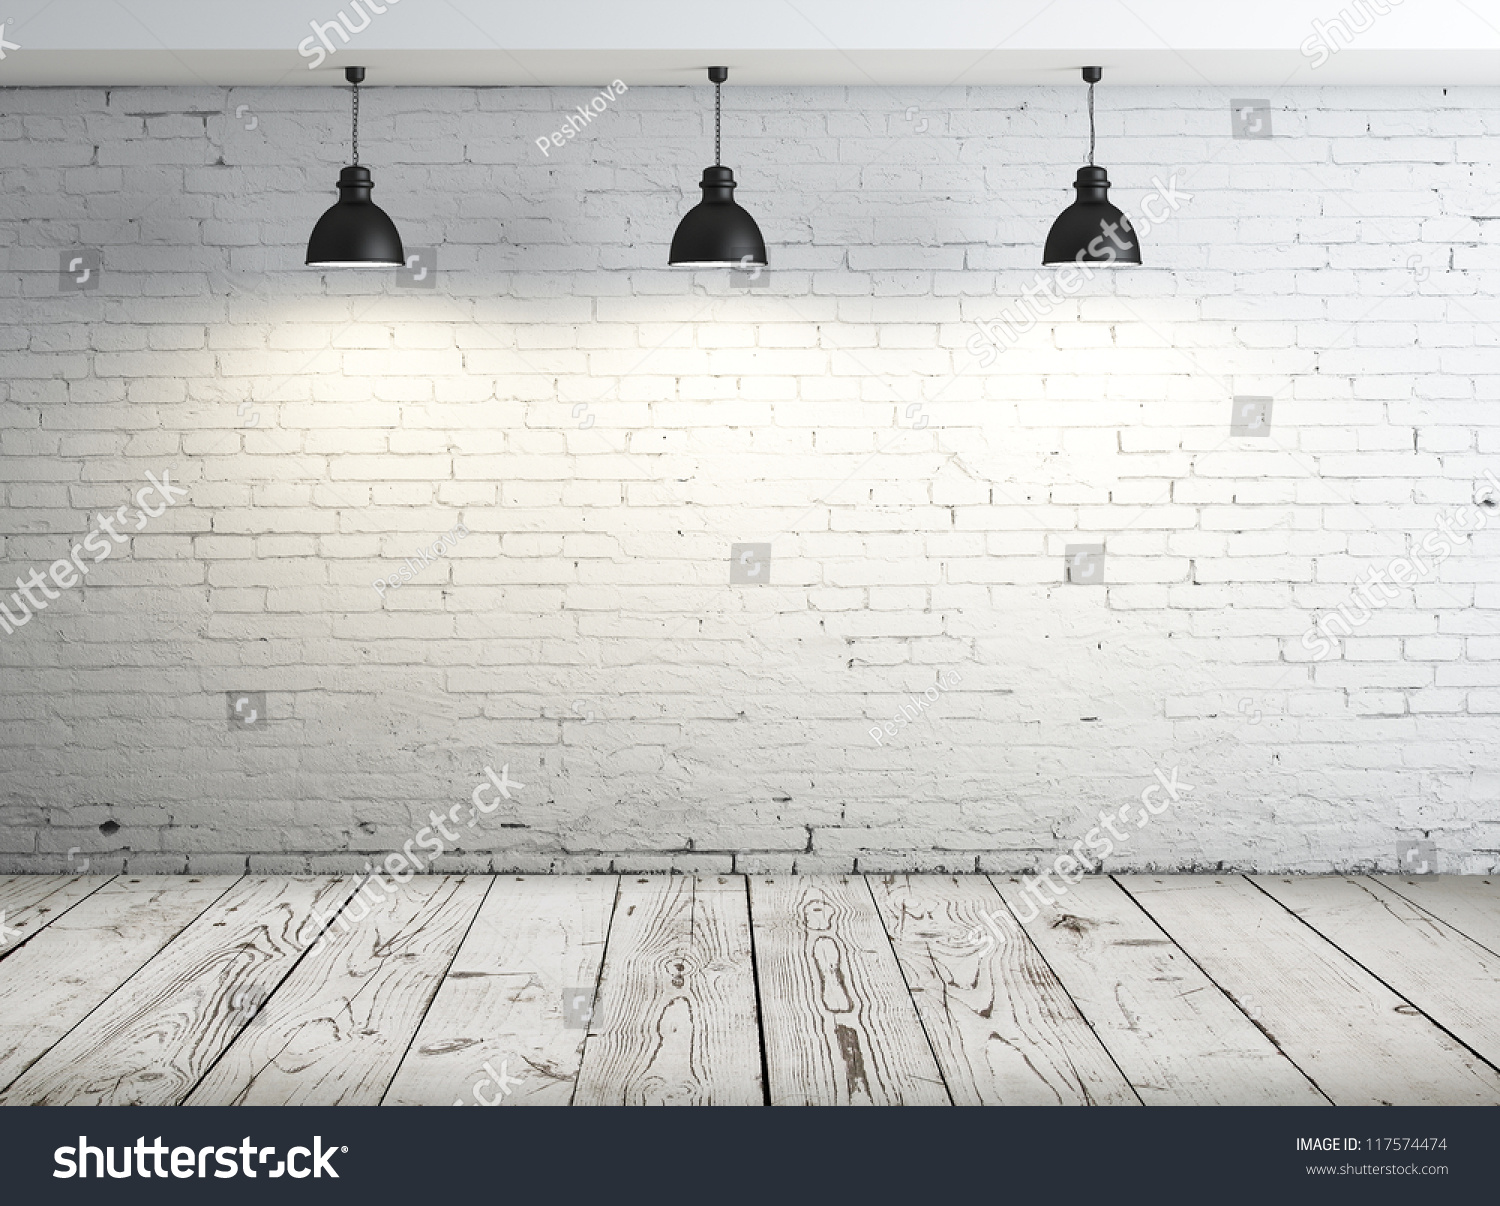 poster in room with ceiling lamp #117574474